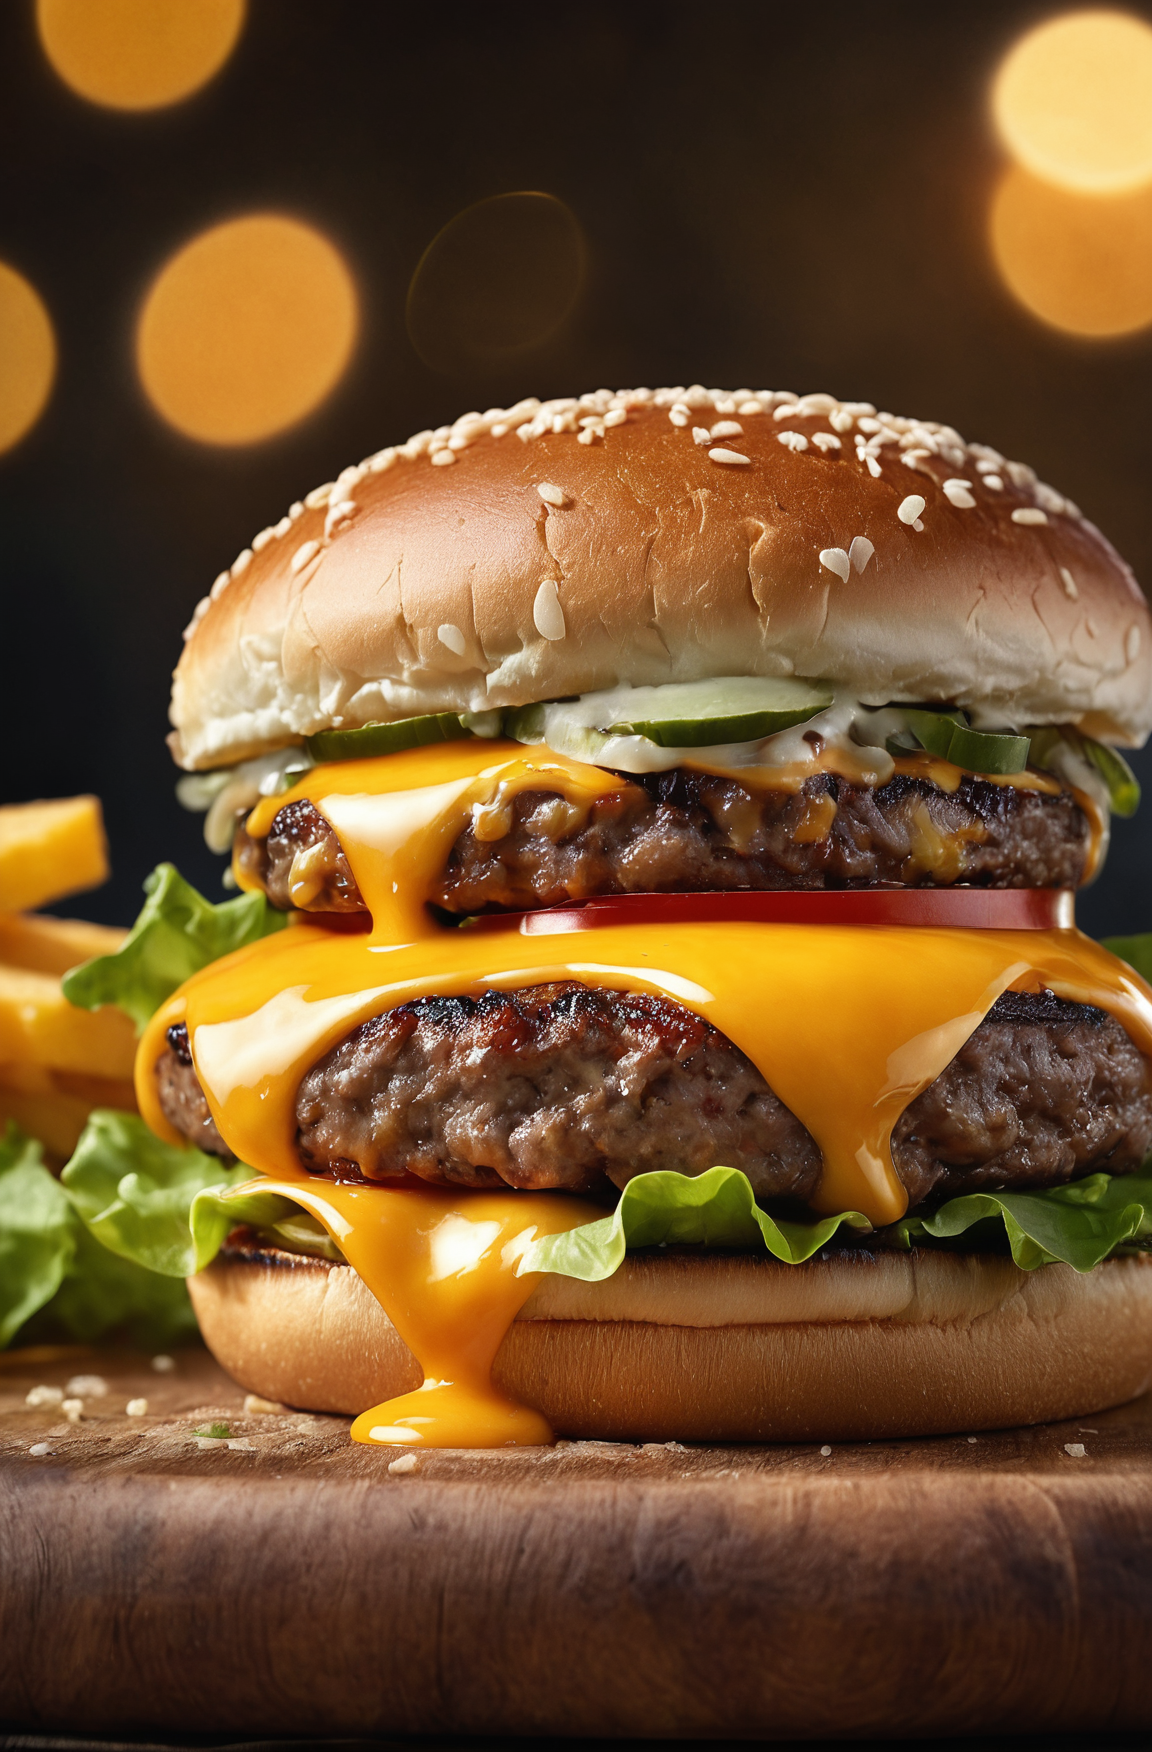 Photo of a burger with cheese from food photograph, food photography, photorealistic, ultra realistic, maximum detail, for...